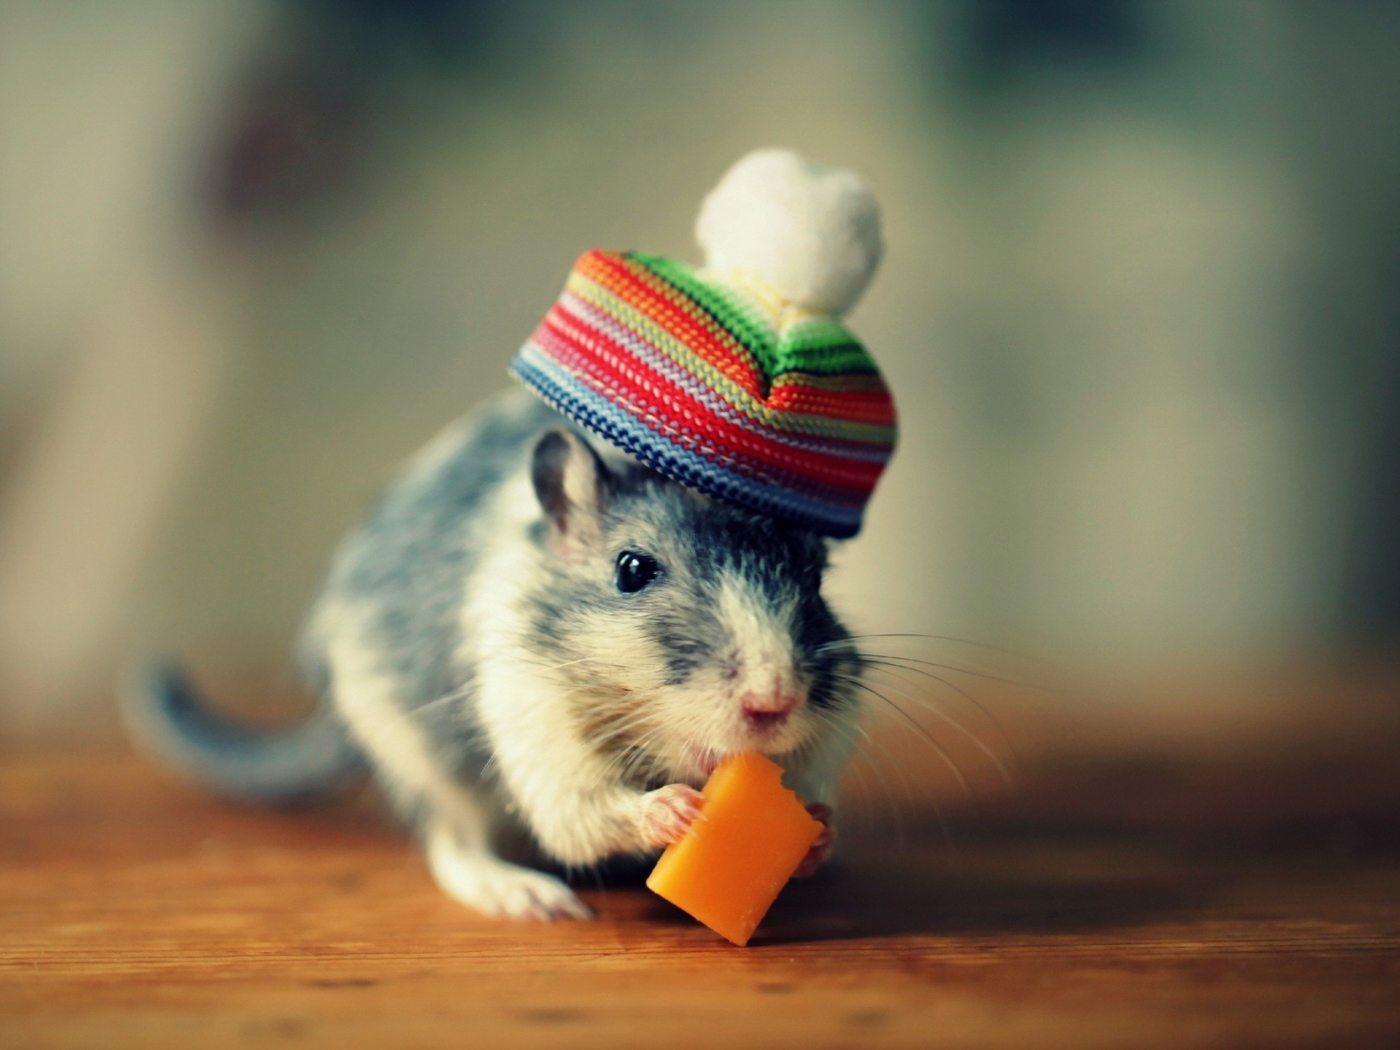 Mouse In Funny Little Hat Eating Cheese wallpaper 1400x1050